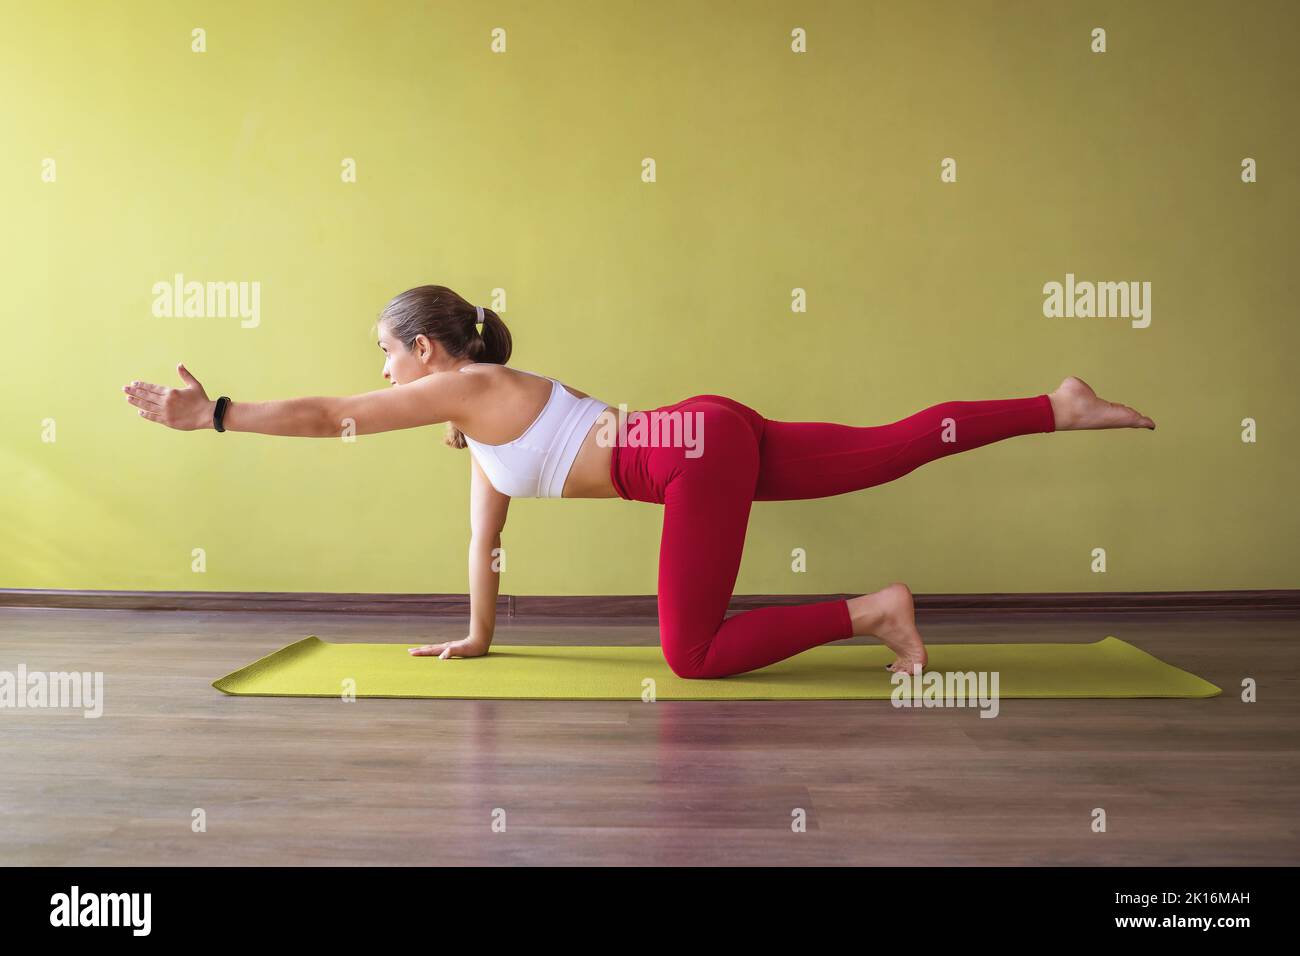 Woman in sportswear practicing yoga doing Parshva Marjariasana exercise, crane pose, exercising in the studio near the wall on the mat. Healthy lifest Stock Photo